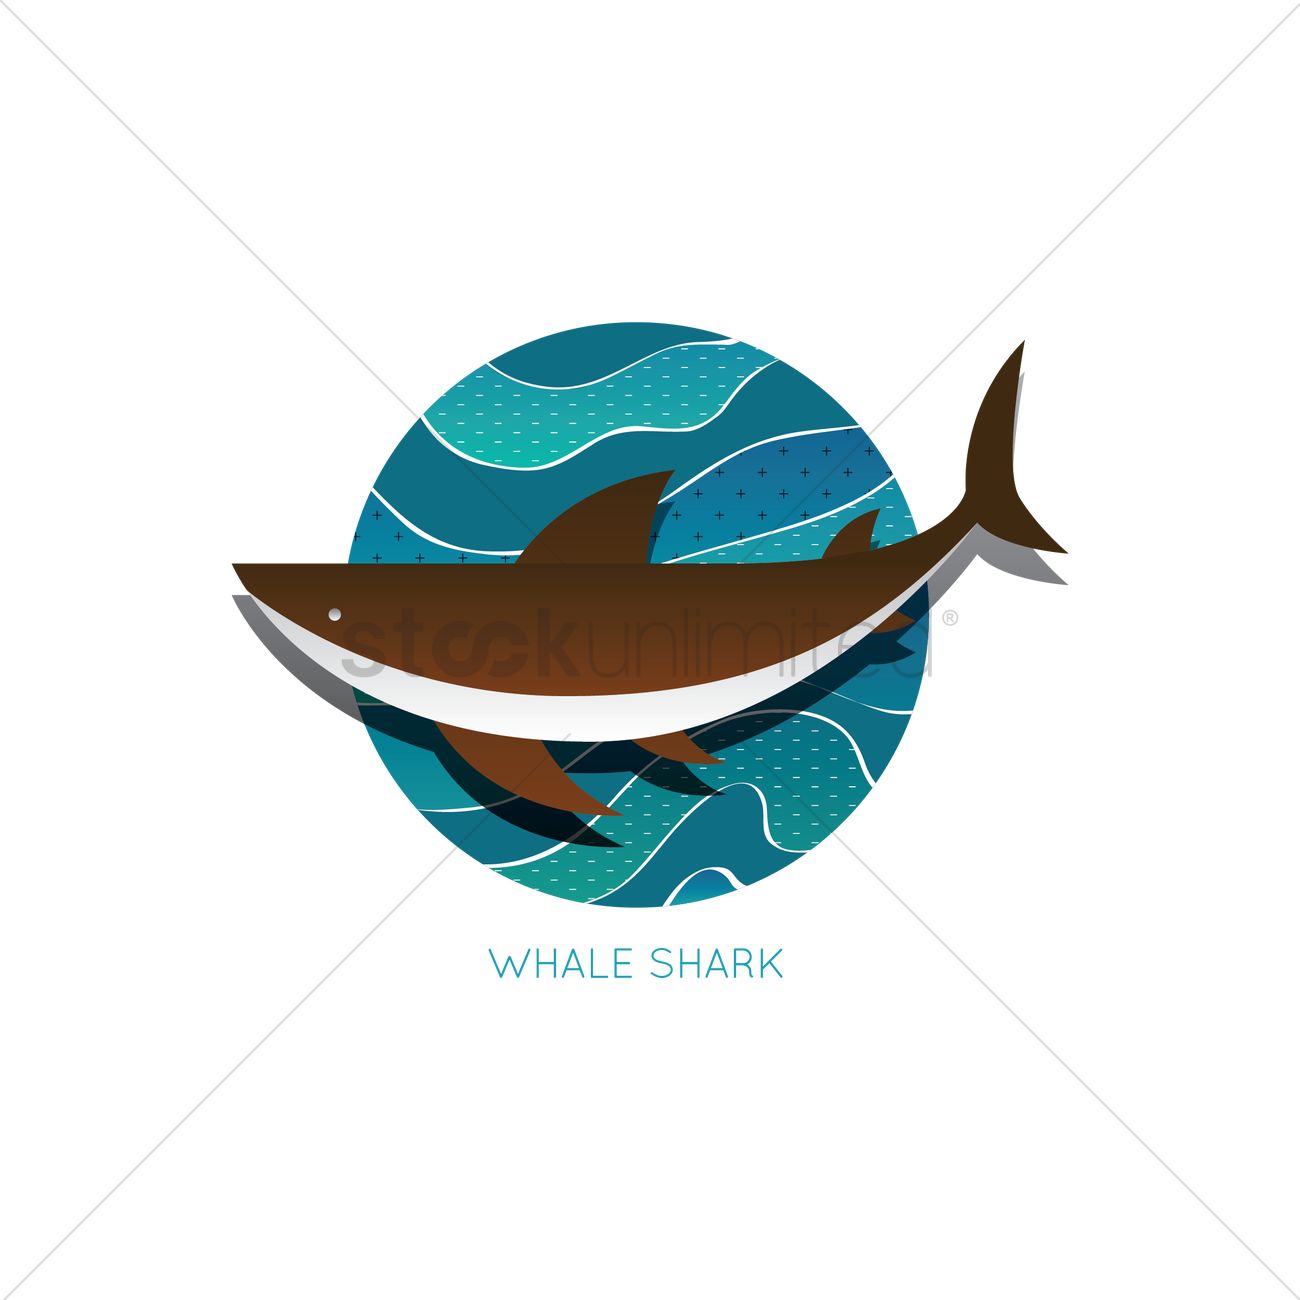 Download Whale Shark Vector at Vectorified.com | Collection of ...